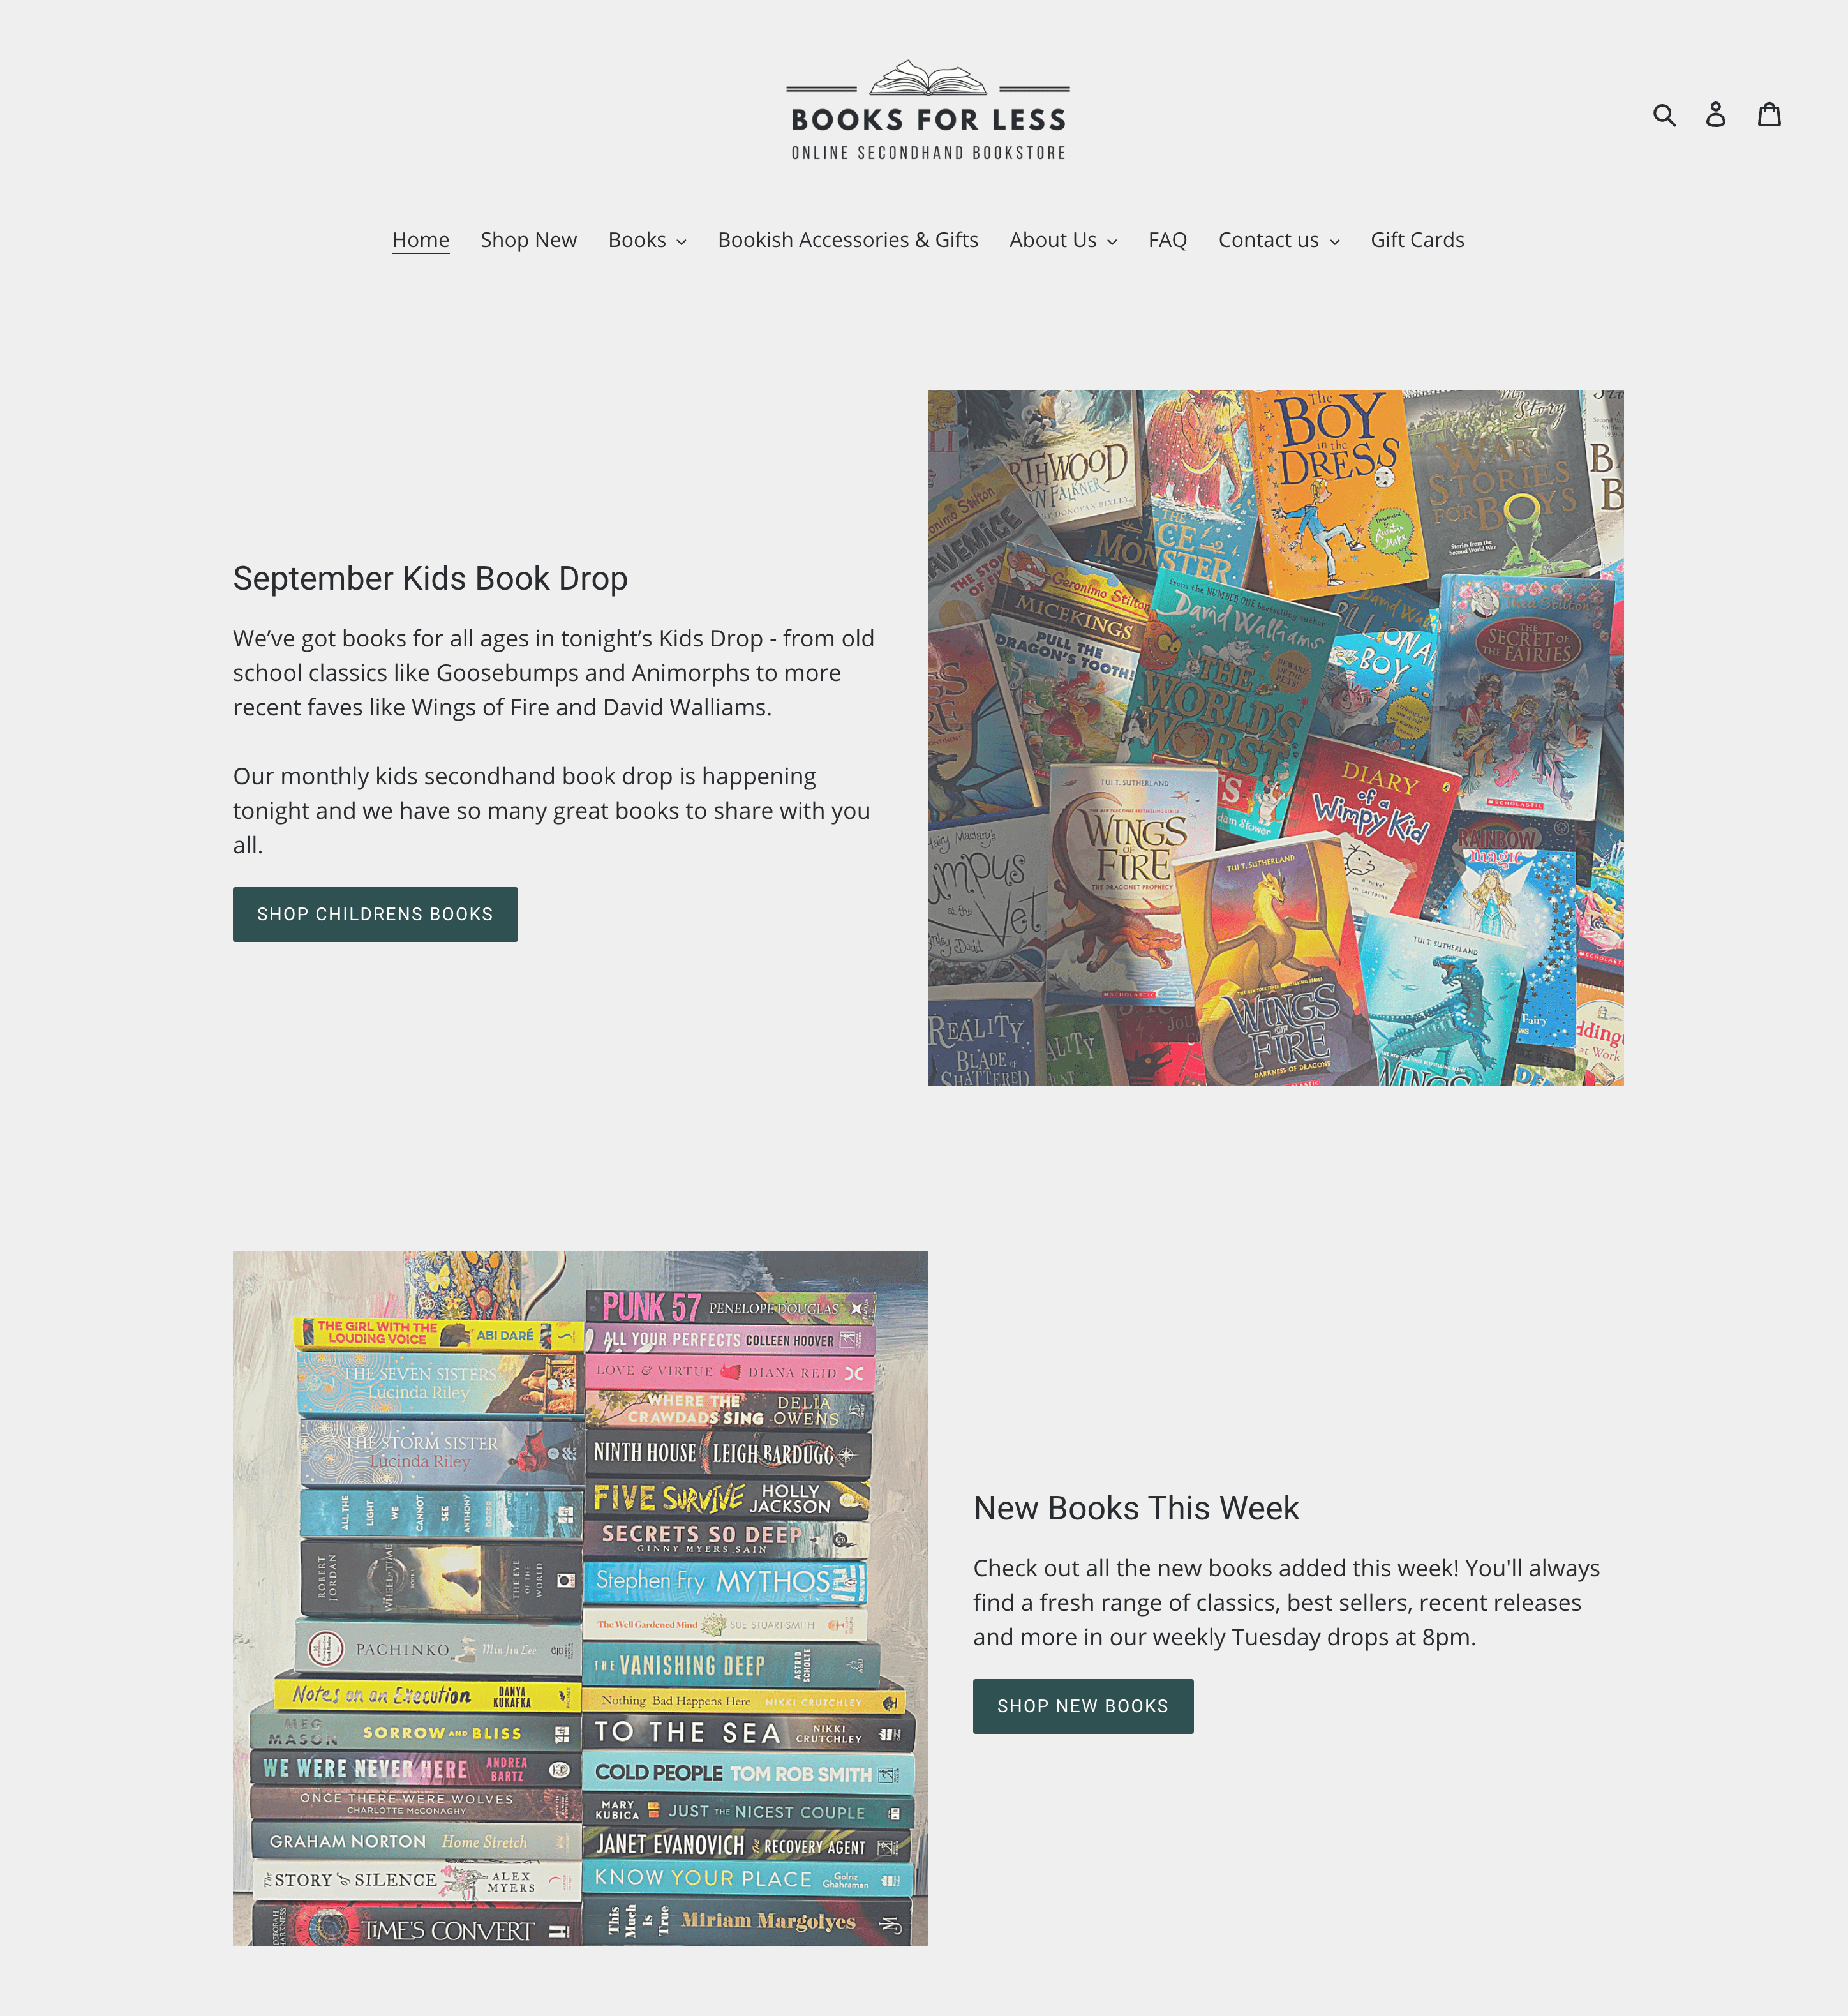 A screenshot from Books For Less’ homepage showing its September Kids Book Drop and the New Books for This Week. 